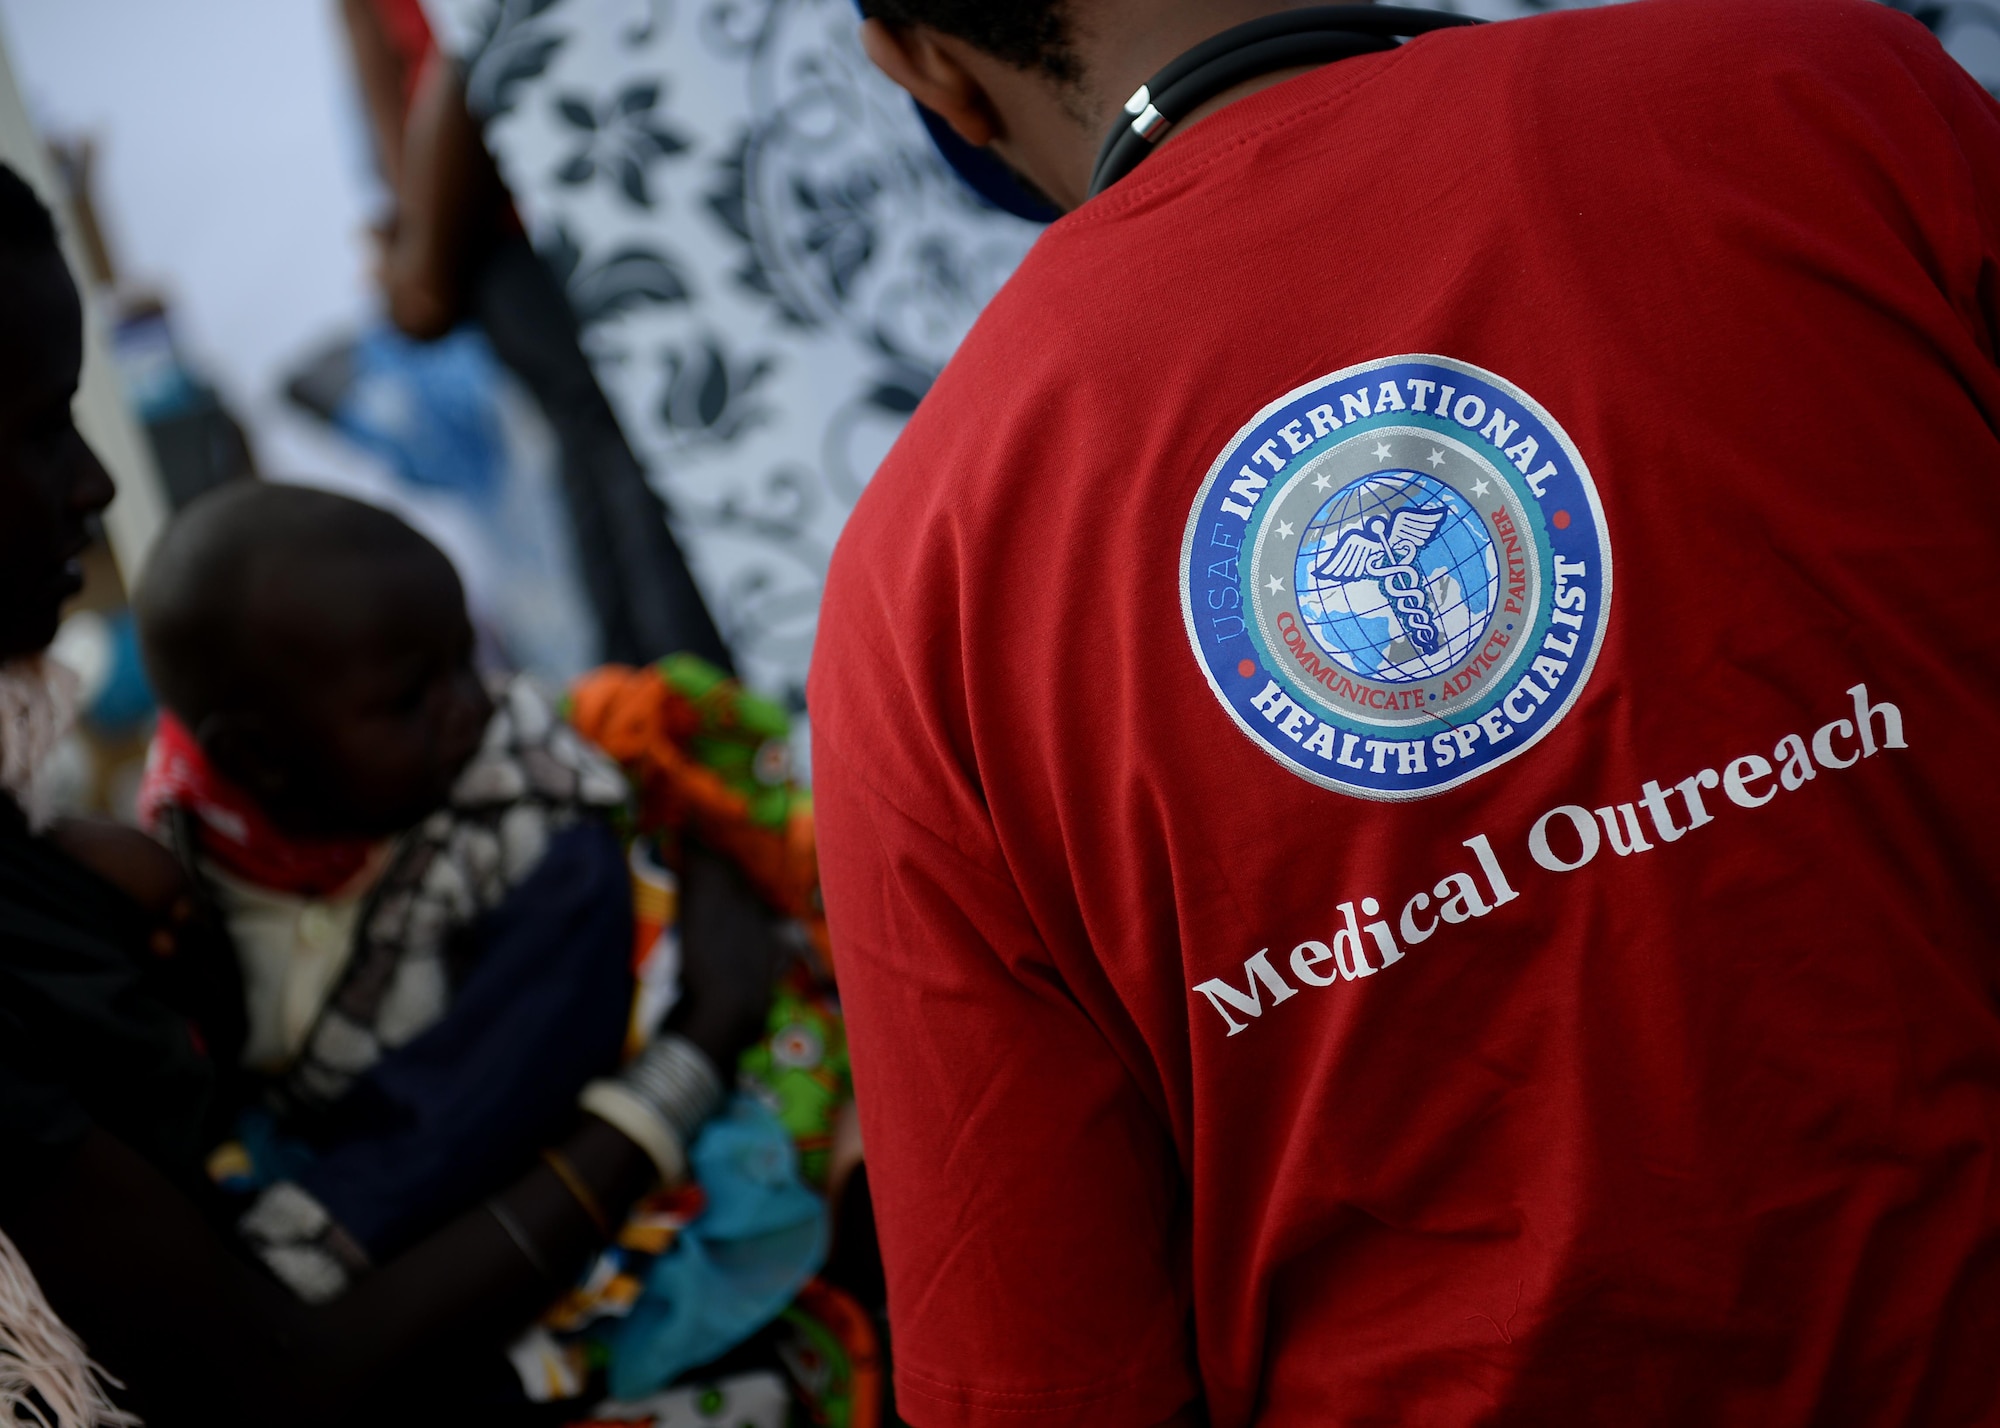 U.S. Air Force Airmen assist patients during a medical outreach event June 22, 2016 at Lokusero, Kenya. The medical outreach was part of the first African Partnership Flight in Kenya. Over the course of three days, medical assistance was provided for more than 1,250 patients. The APF is designed for U.S. and African partner nations to work together in a learning environment to help build expertise and professional knowledge and skills. (U.S. Air Force photo by Tech. Sgt. Evelyn Chavez/Released)